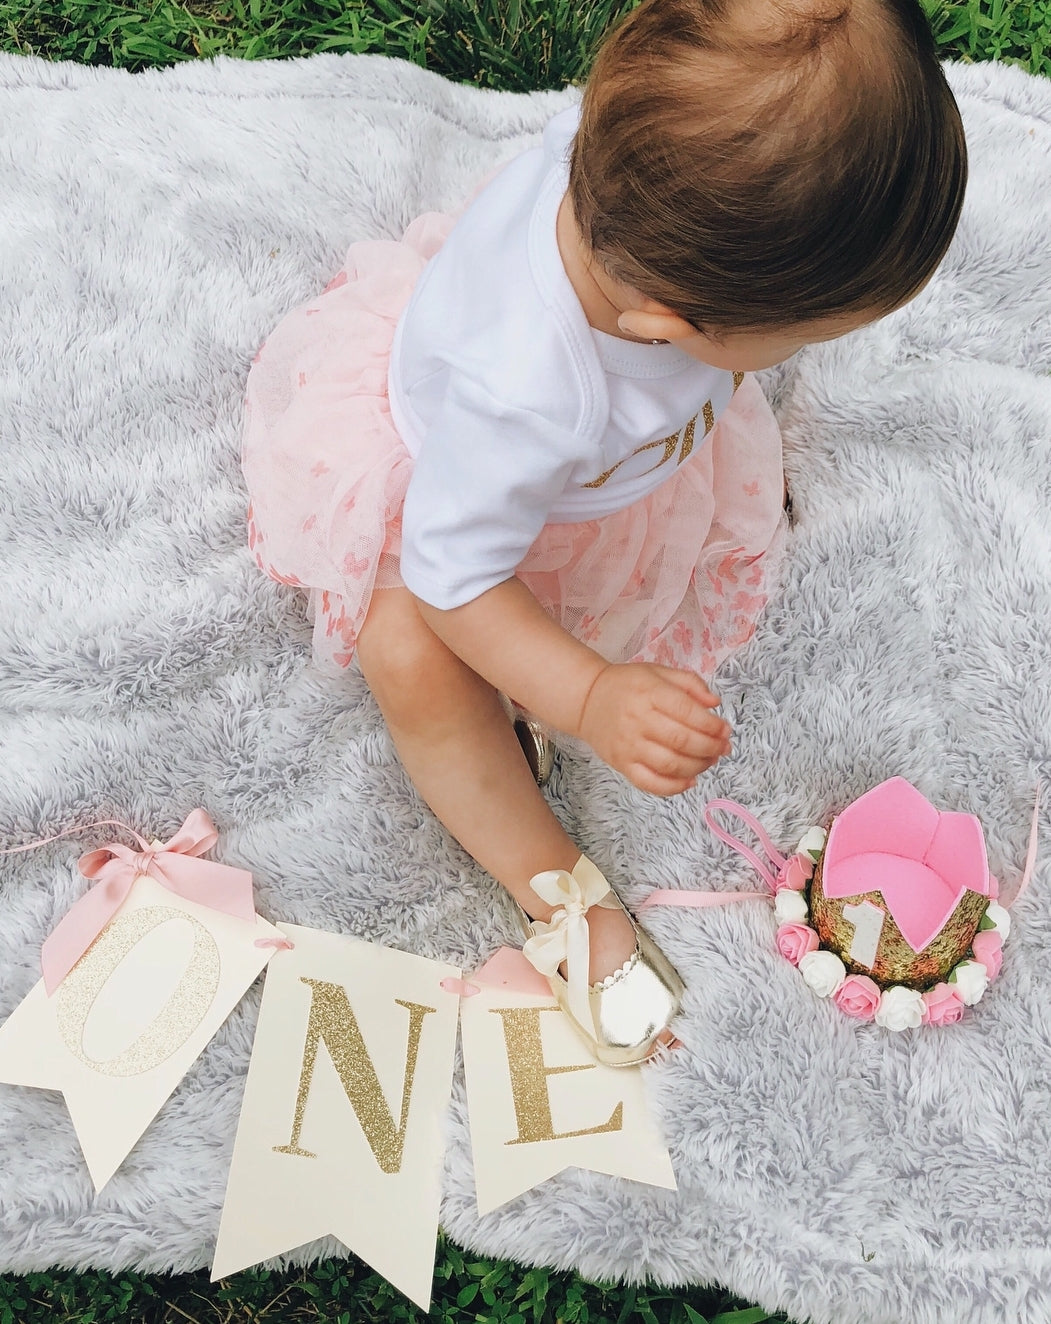 ONE Highchair Banner with Bows